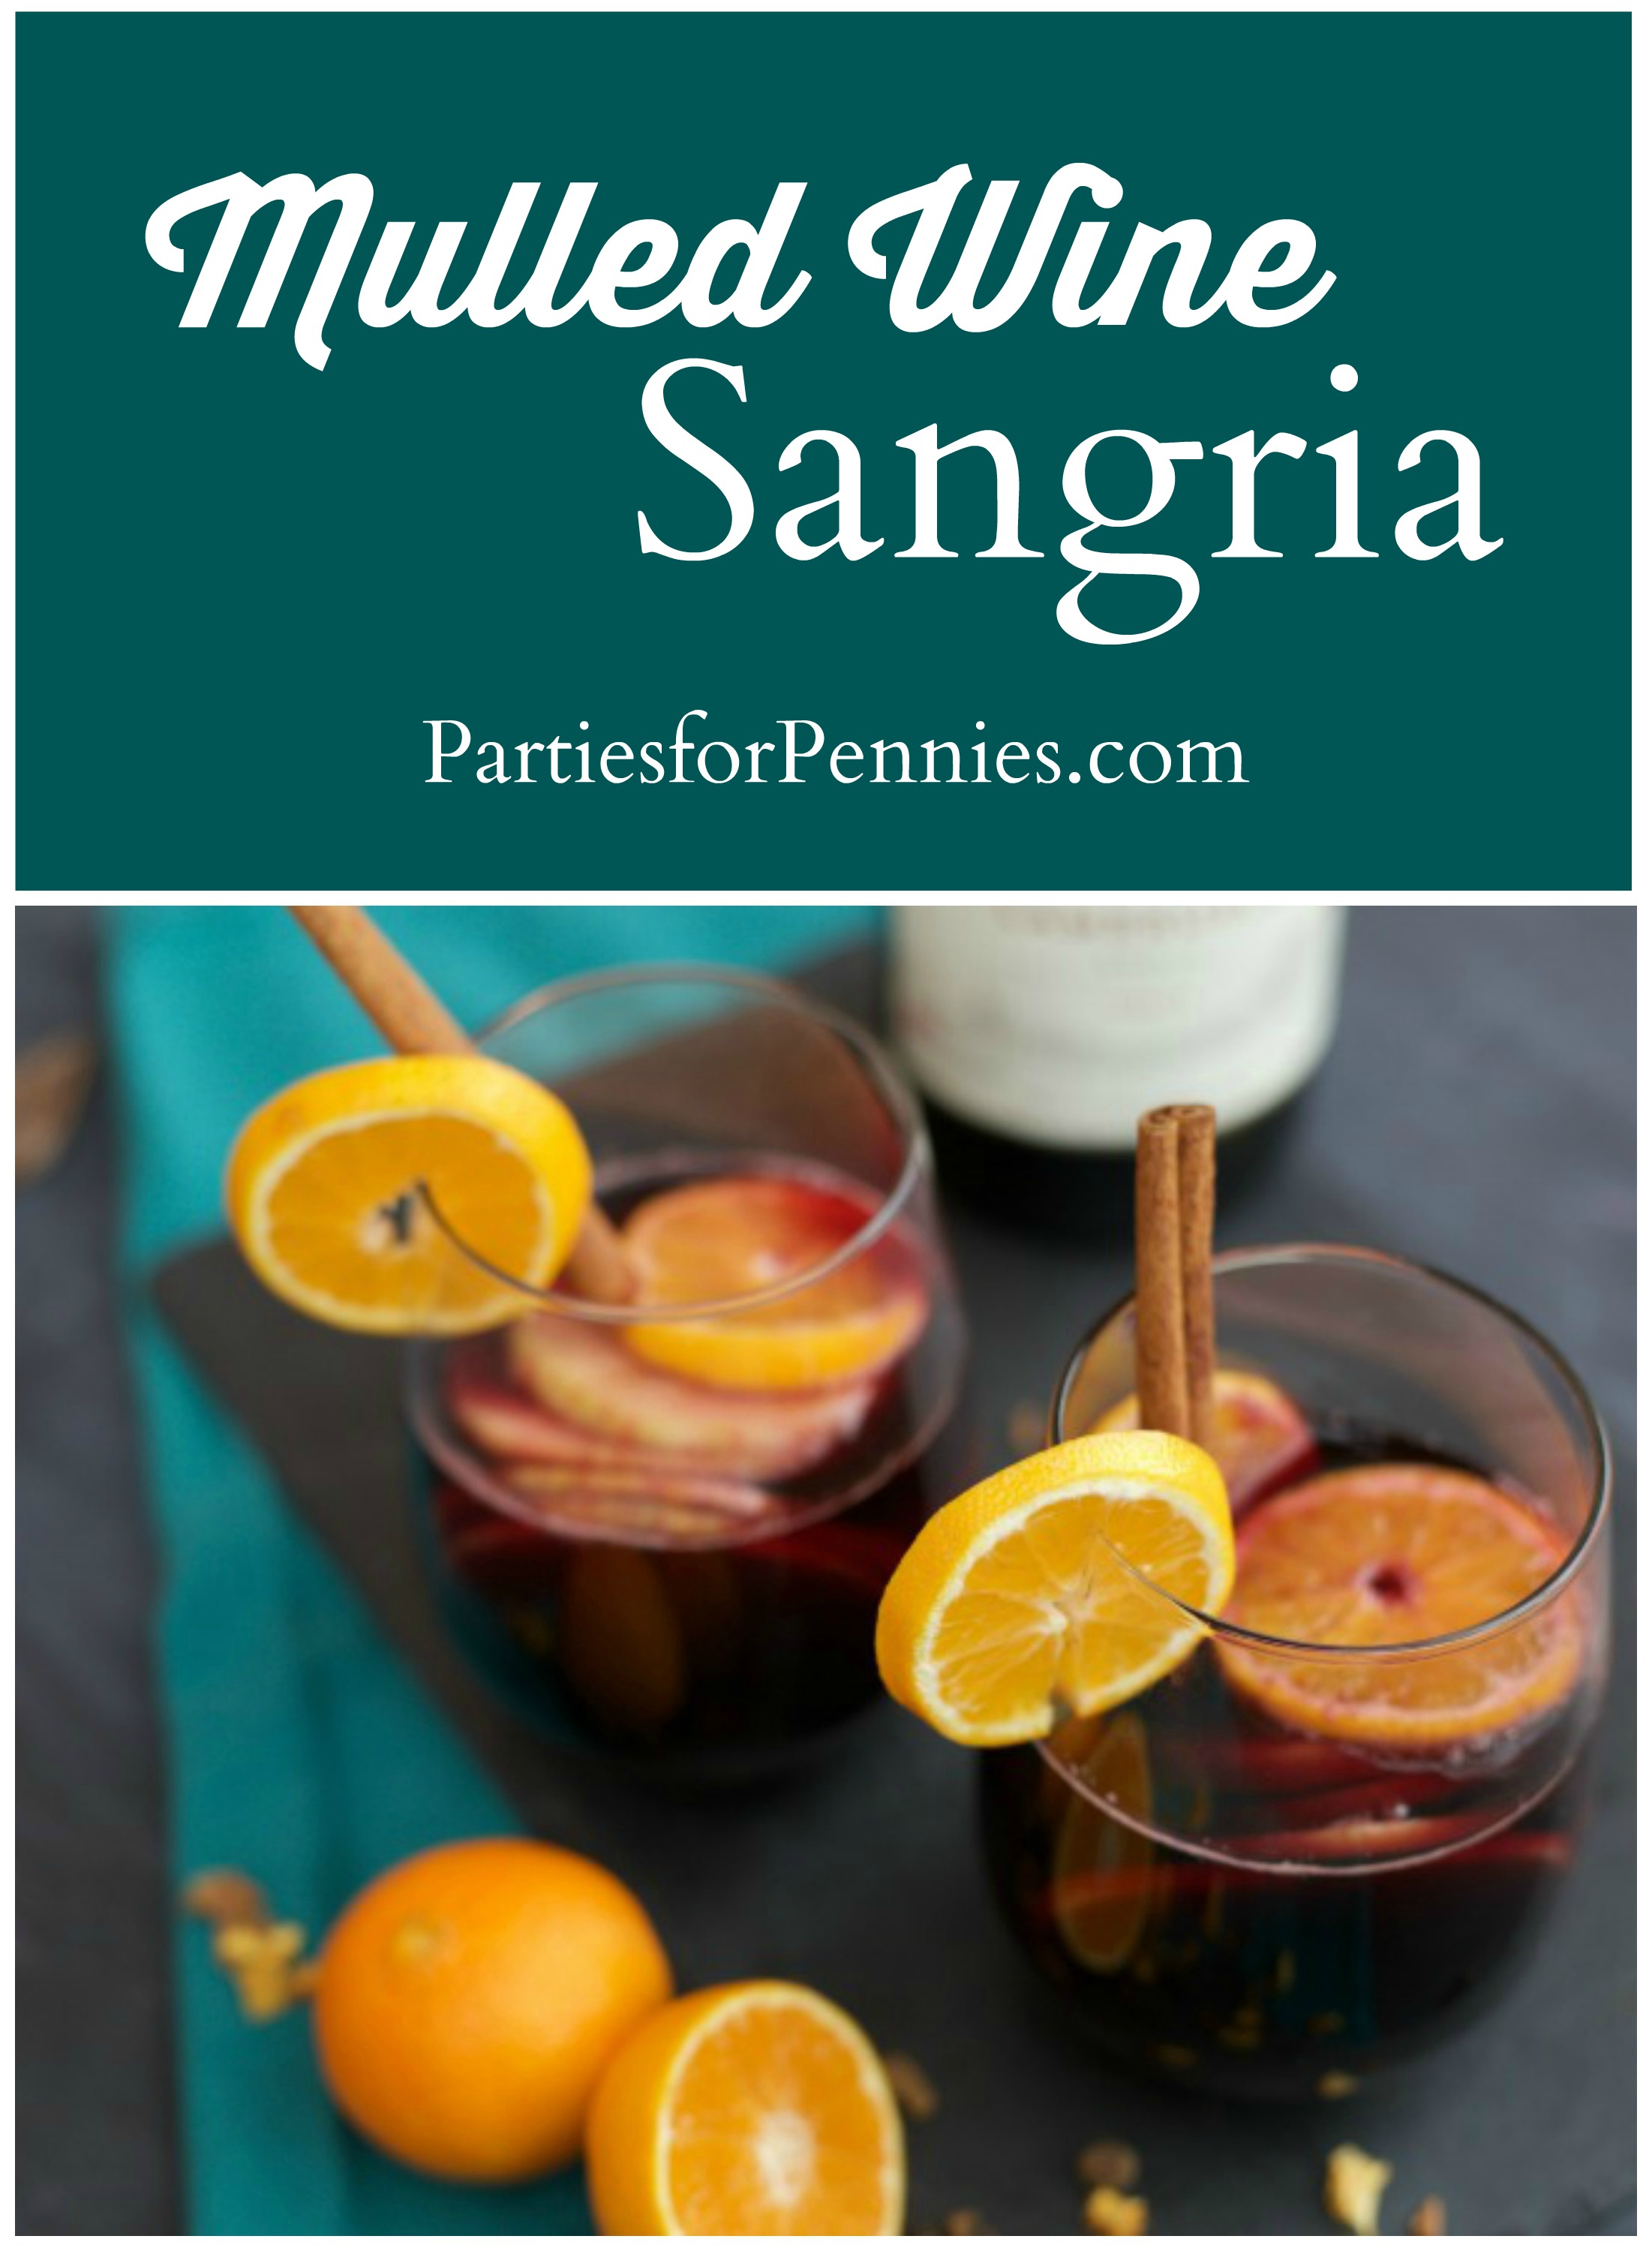 Mulled Wine Sangria Recipe by PartiesforPennies.com | Reunite Wine | Drink Recipe | Christmas Cocktail | Holiday Drink